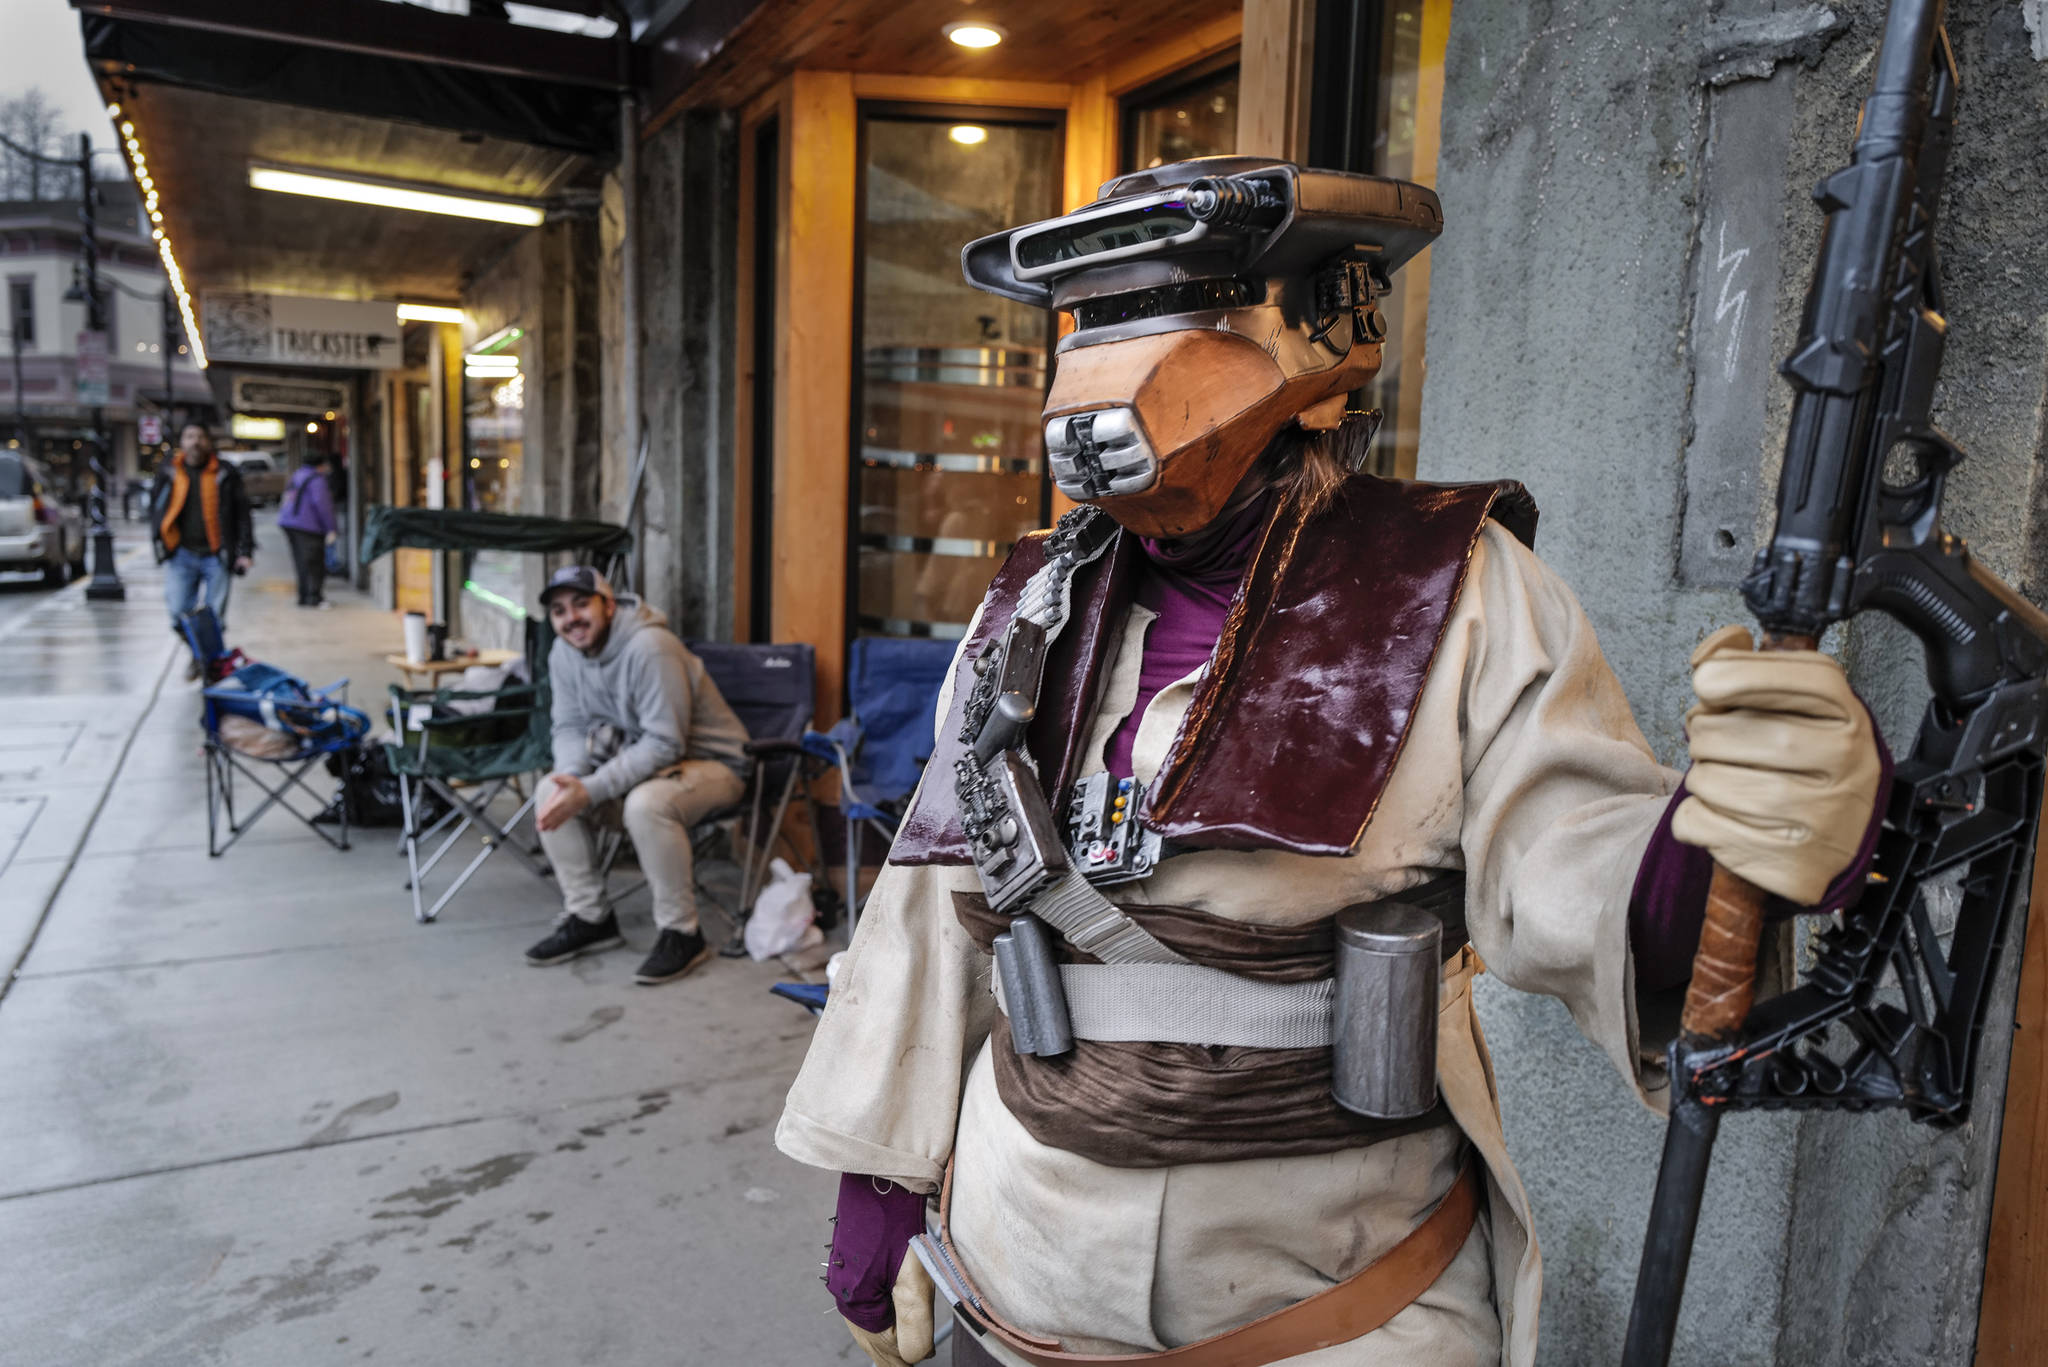 Rebekah Garcia waits in line for the 10 p.m. showing of the latest movie, “Star Wars: Episode IX - The Rise of Skywalker” outside the 20th Century Theatre dressed as Boushh, a character from the “Empire Strikes Back” on Thursday, Dec. 19, 2019. (Michael Penn | Juneau Empire)